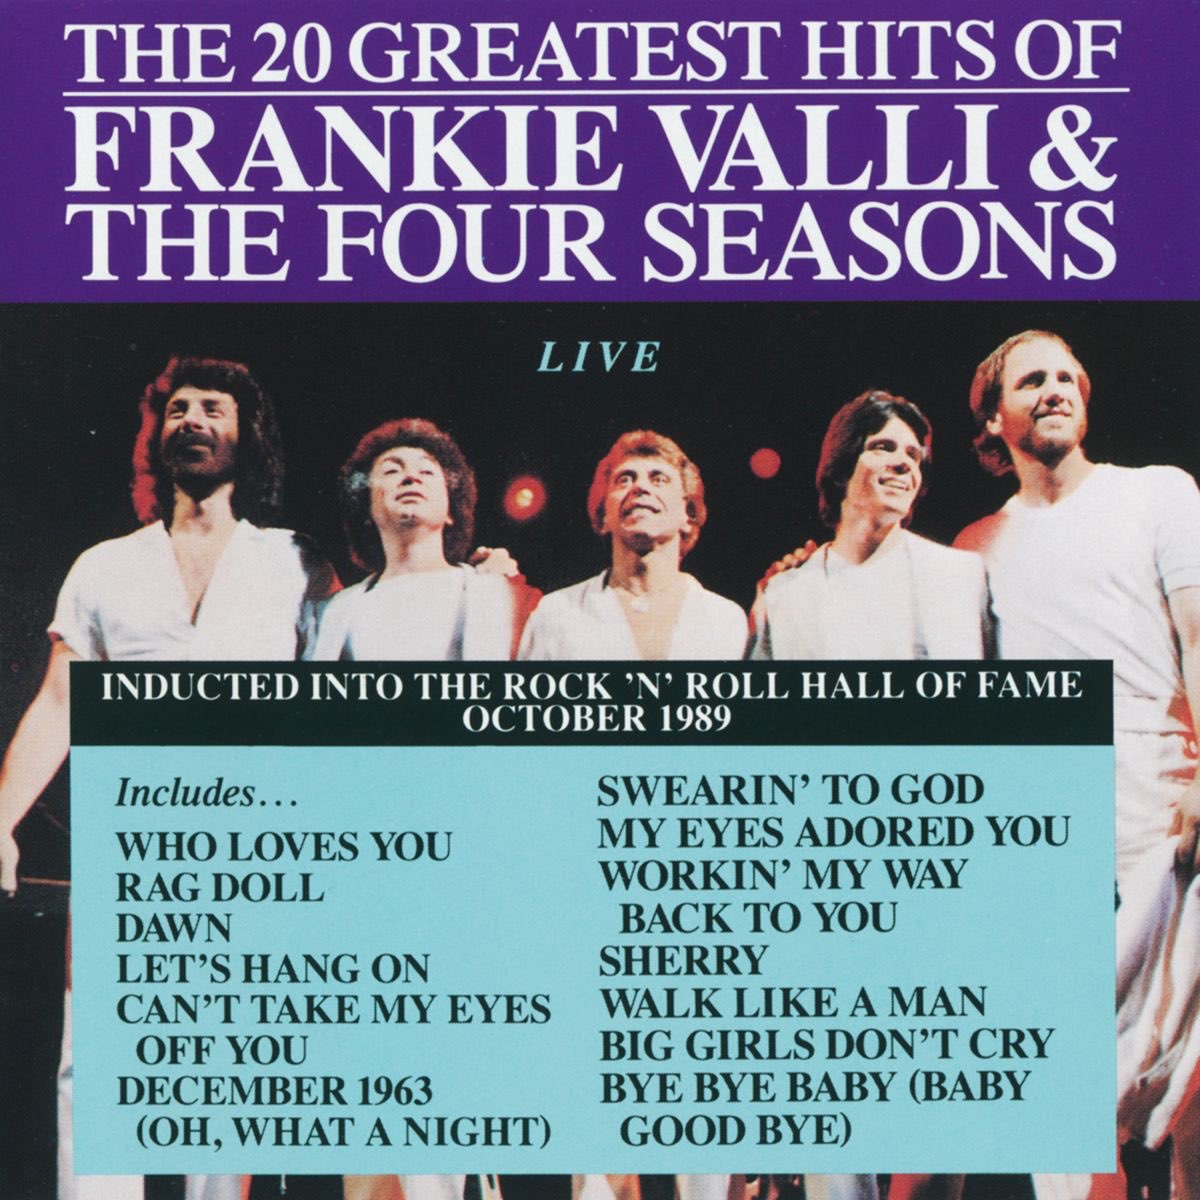 ‎The 20 Greatest Hits of Frankie Valli & The Four Seasons (Live) de